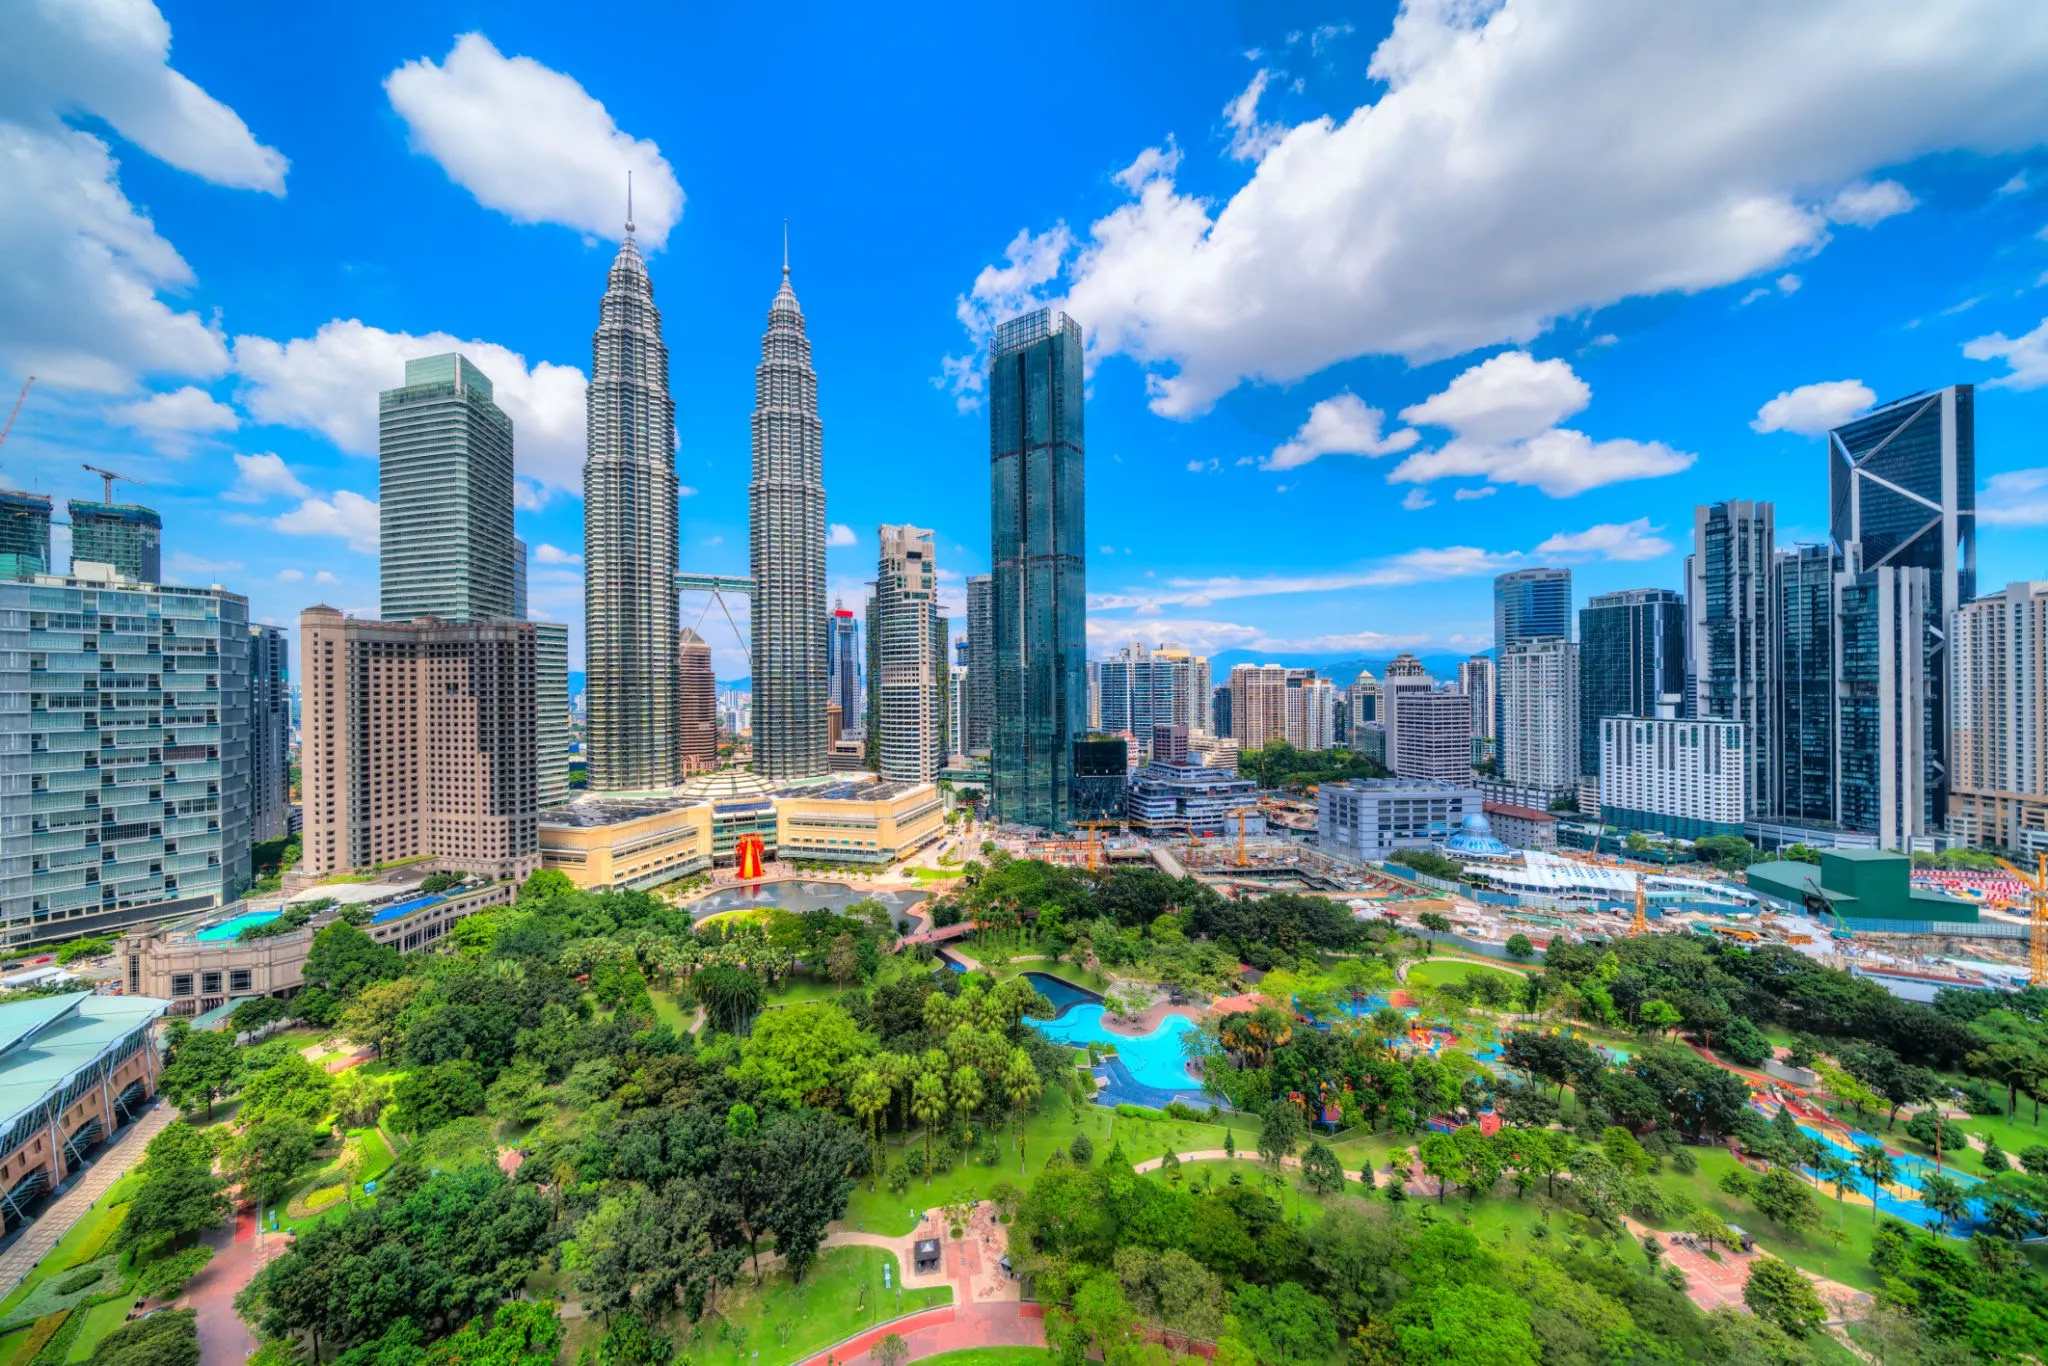 Kuala Lumpur Central Park in Malaysia, East Asia | Parks - Rated 4.7